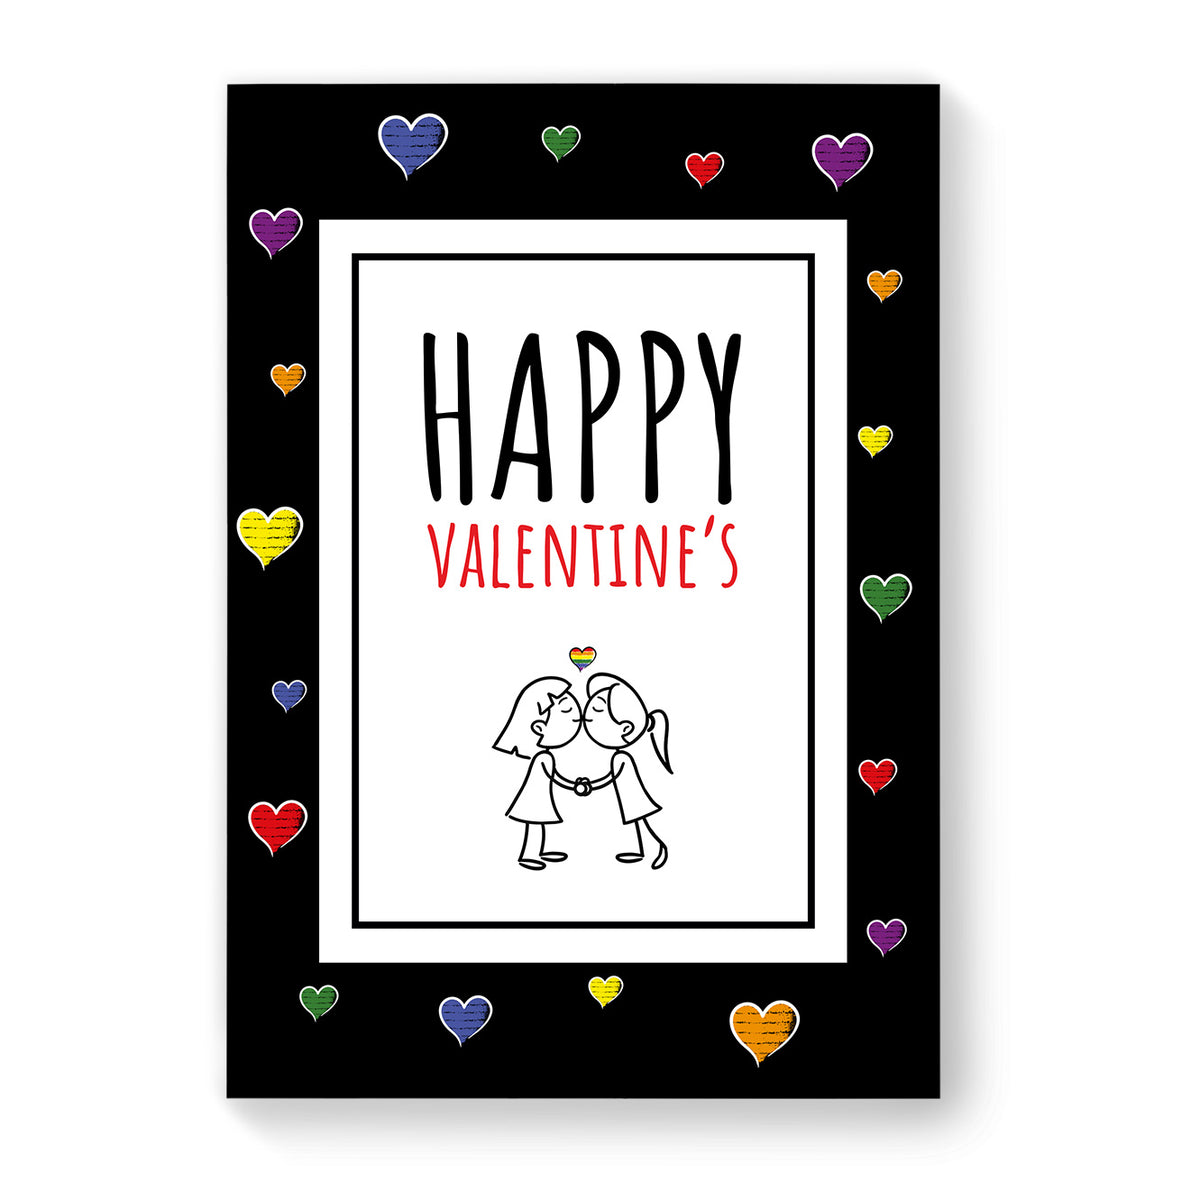 Happy Valentines - Lesbian Gay Couple Card - Black Heart | Gift